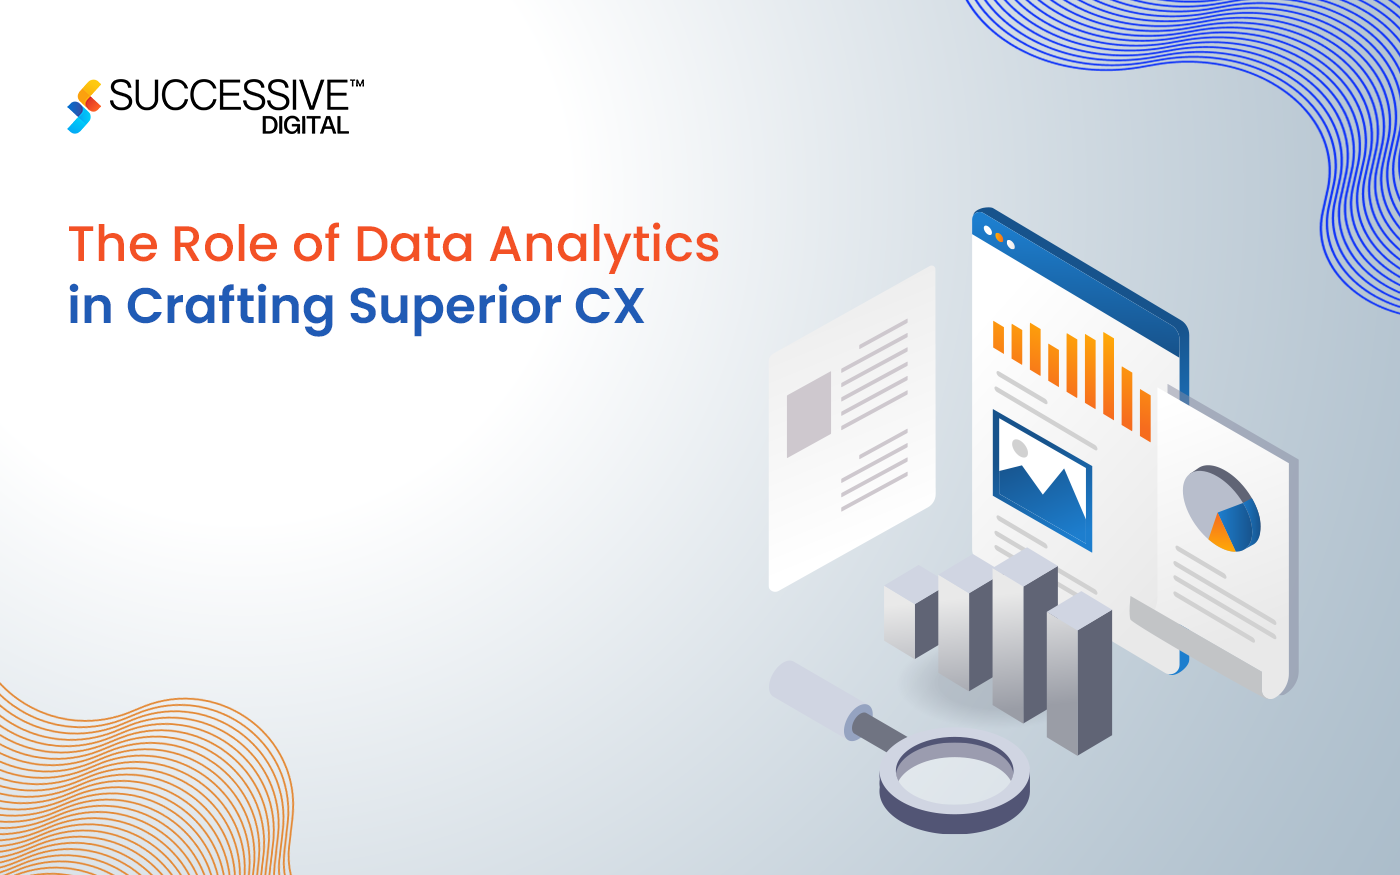 The Role of Data Analytics in Crafting Superior CX